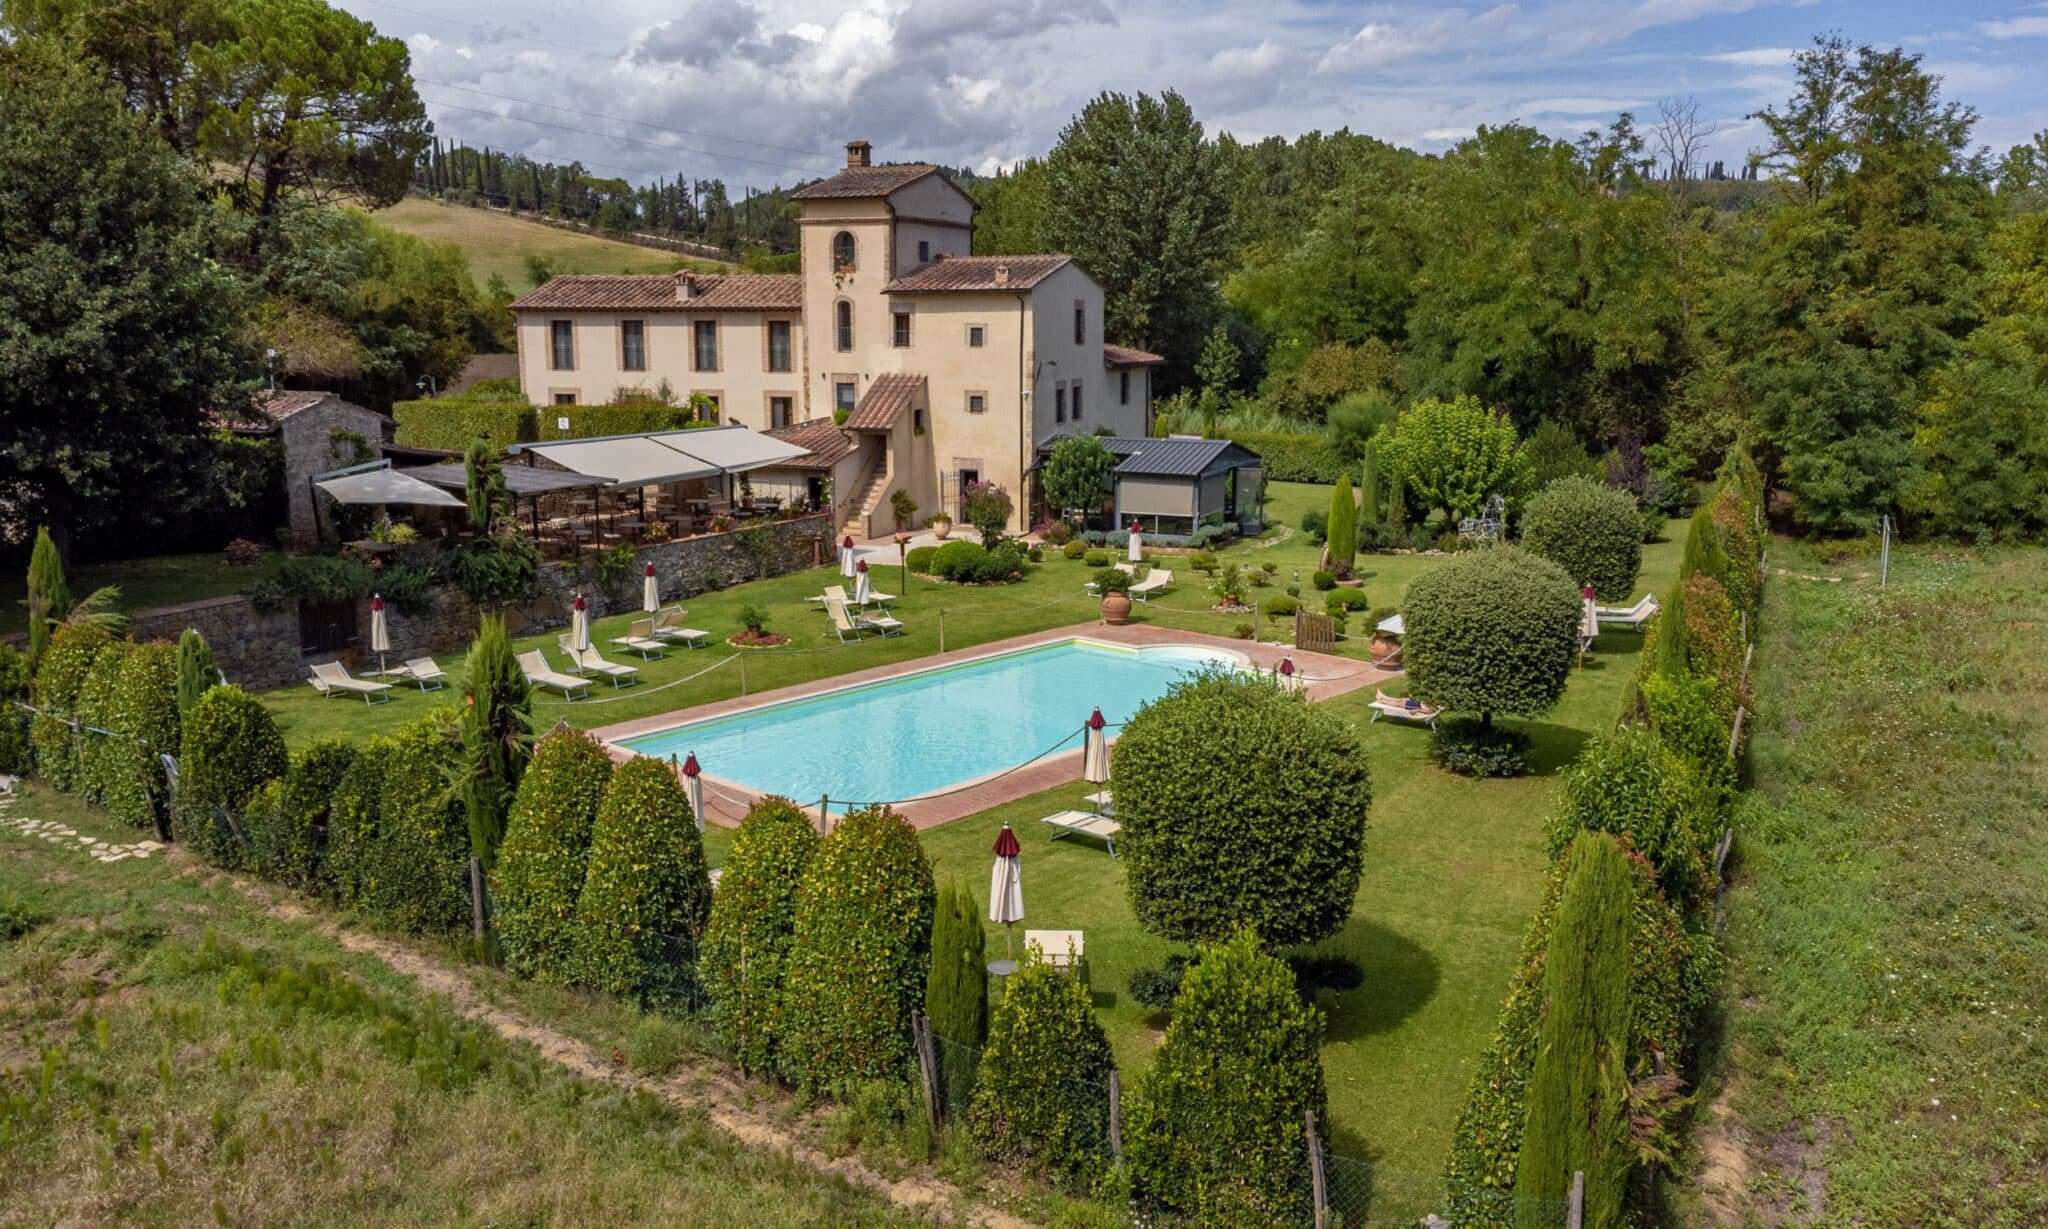 Magnificent Villa with a Pool in San Gimignano, Siena